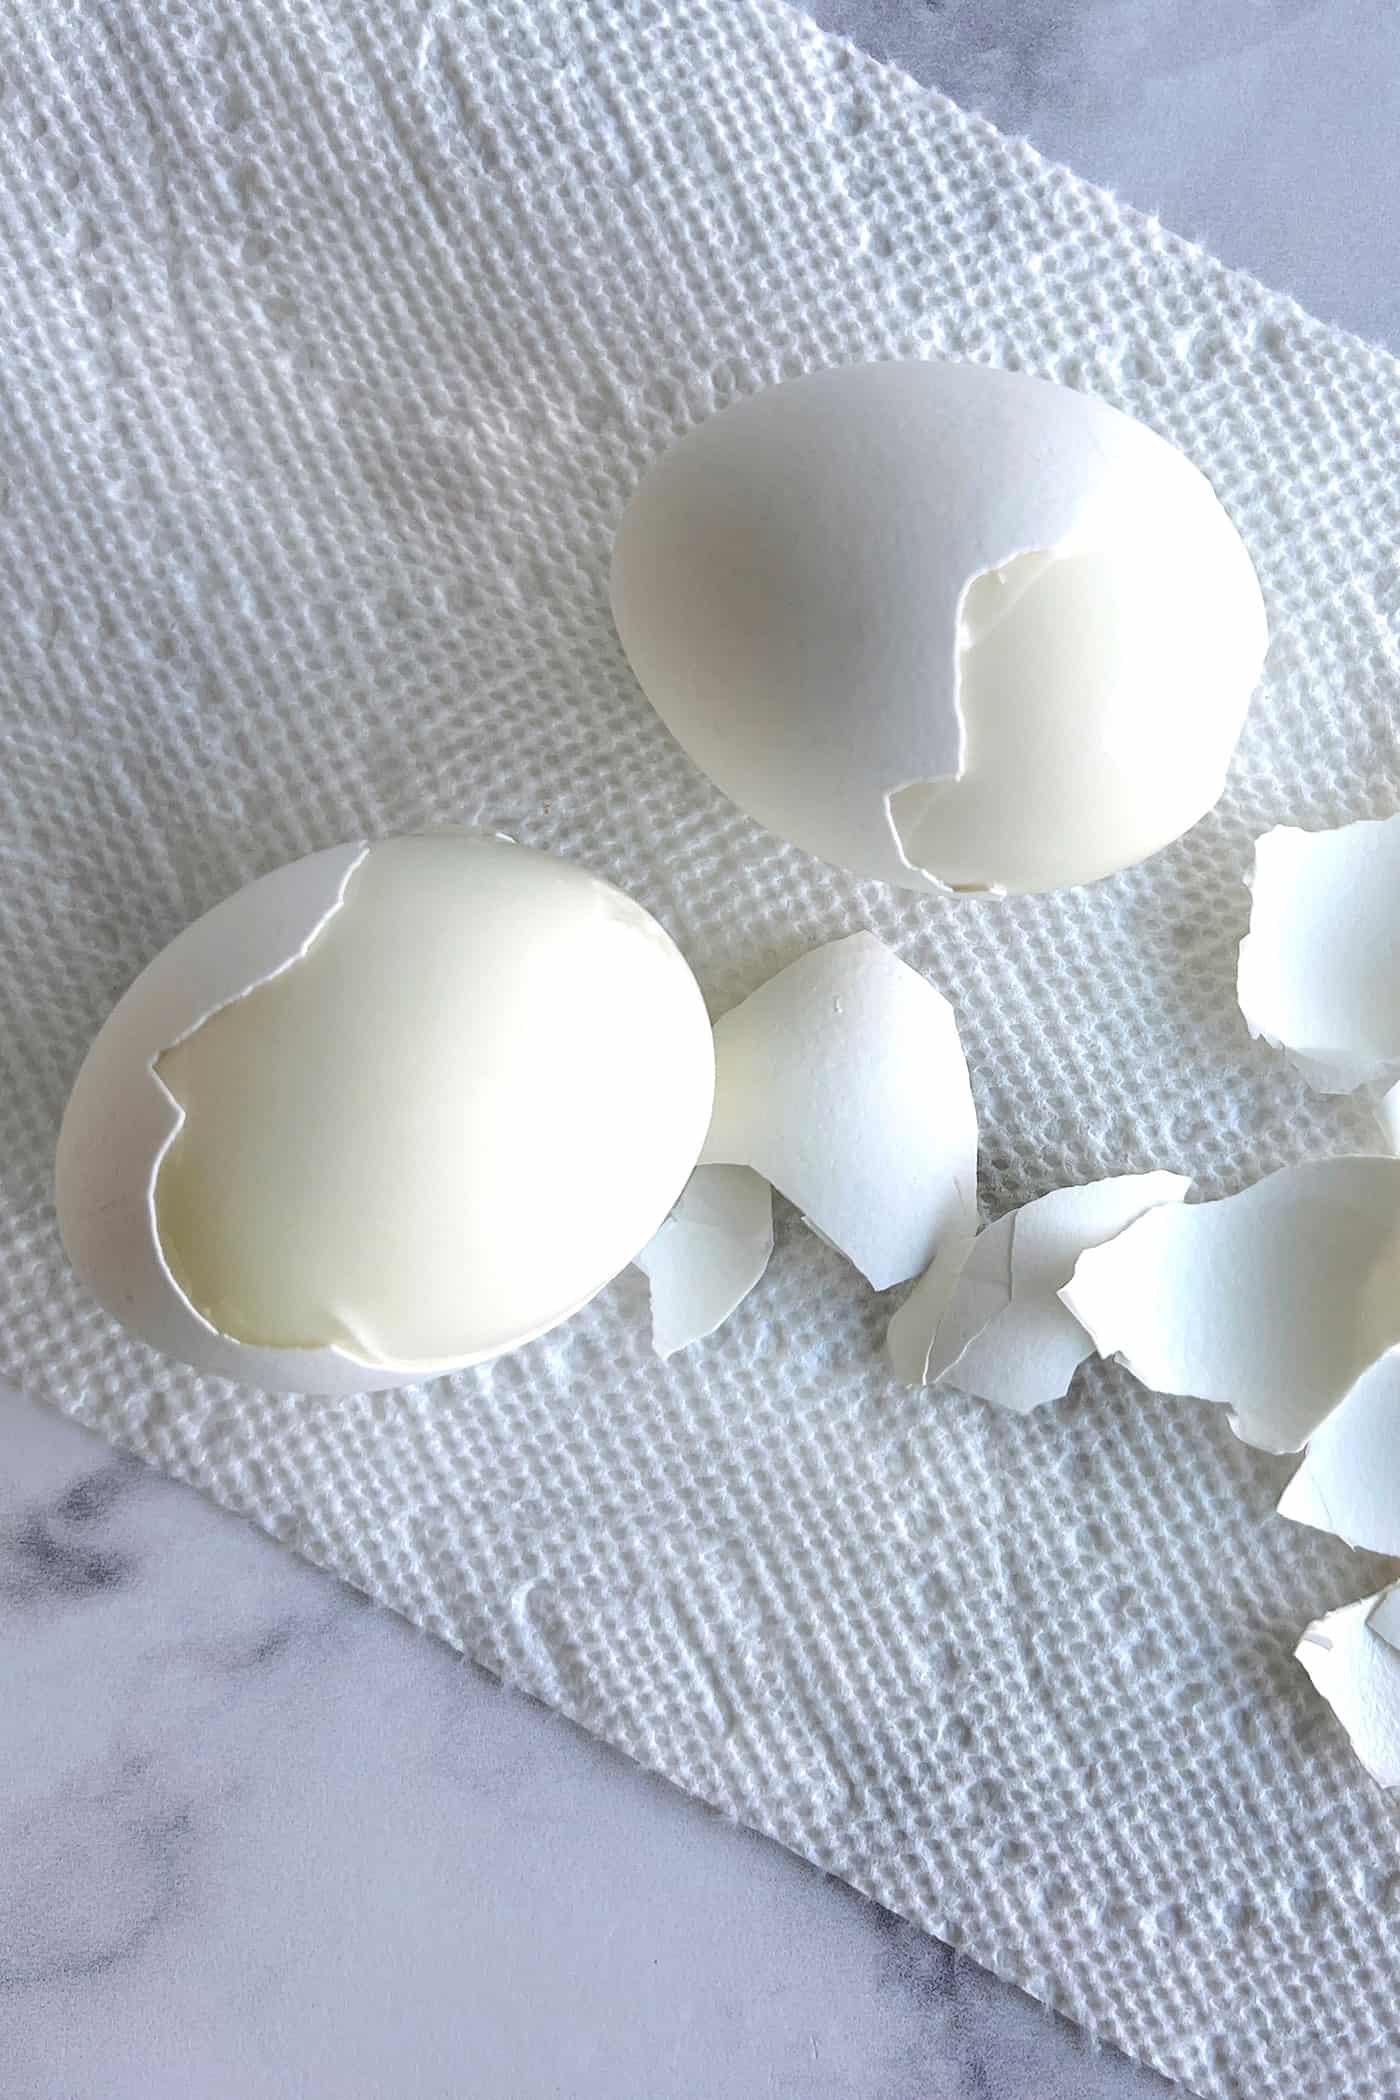 Eggs being peeled on a paper towel